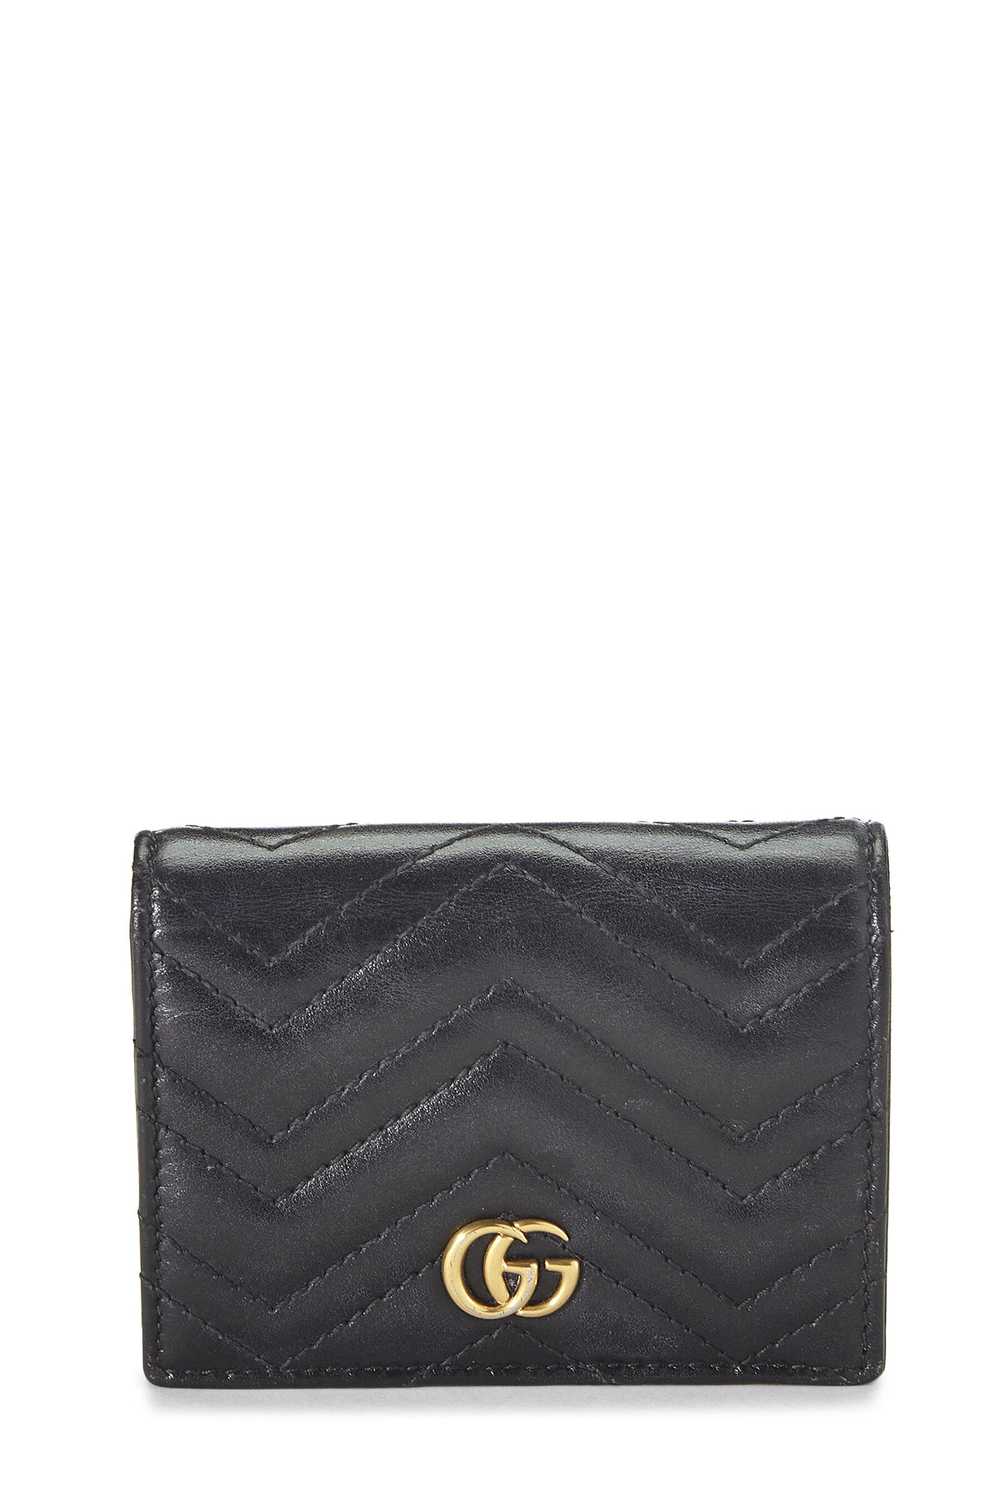 Black Leather GG Marmont Card Case - image 1